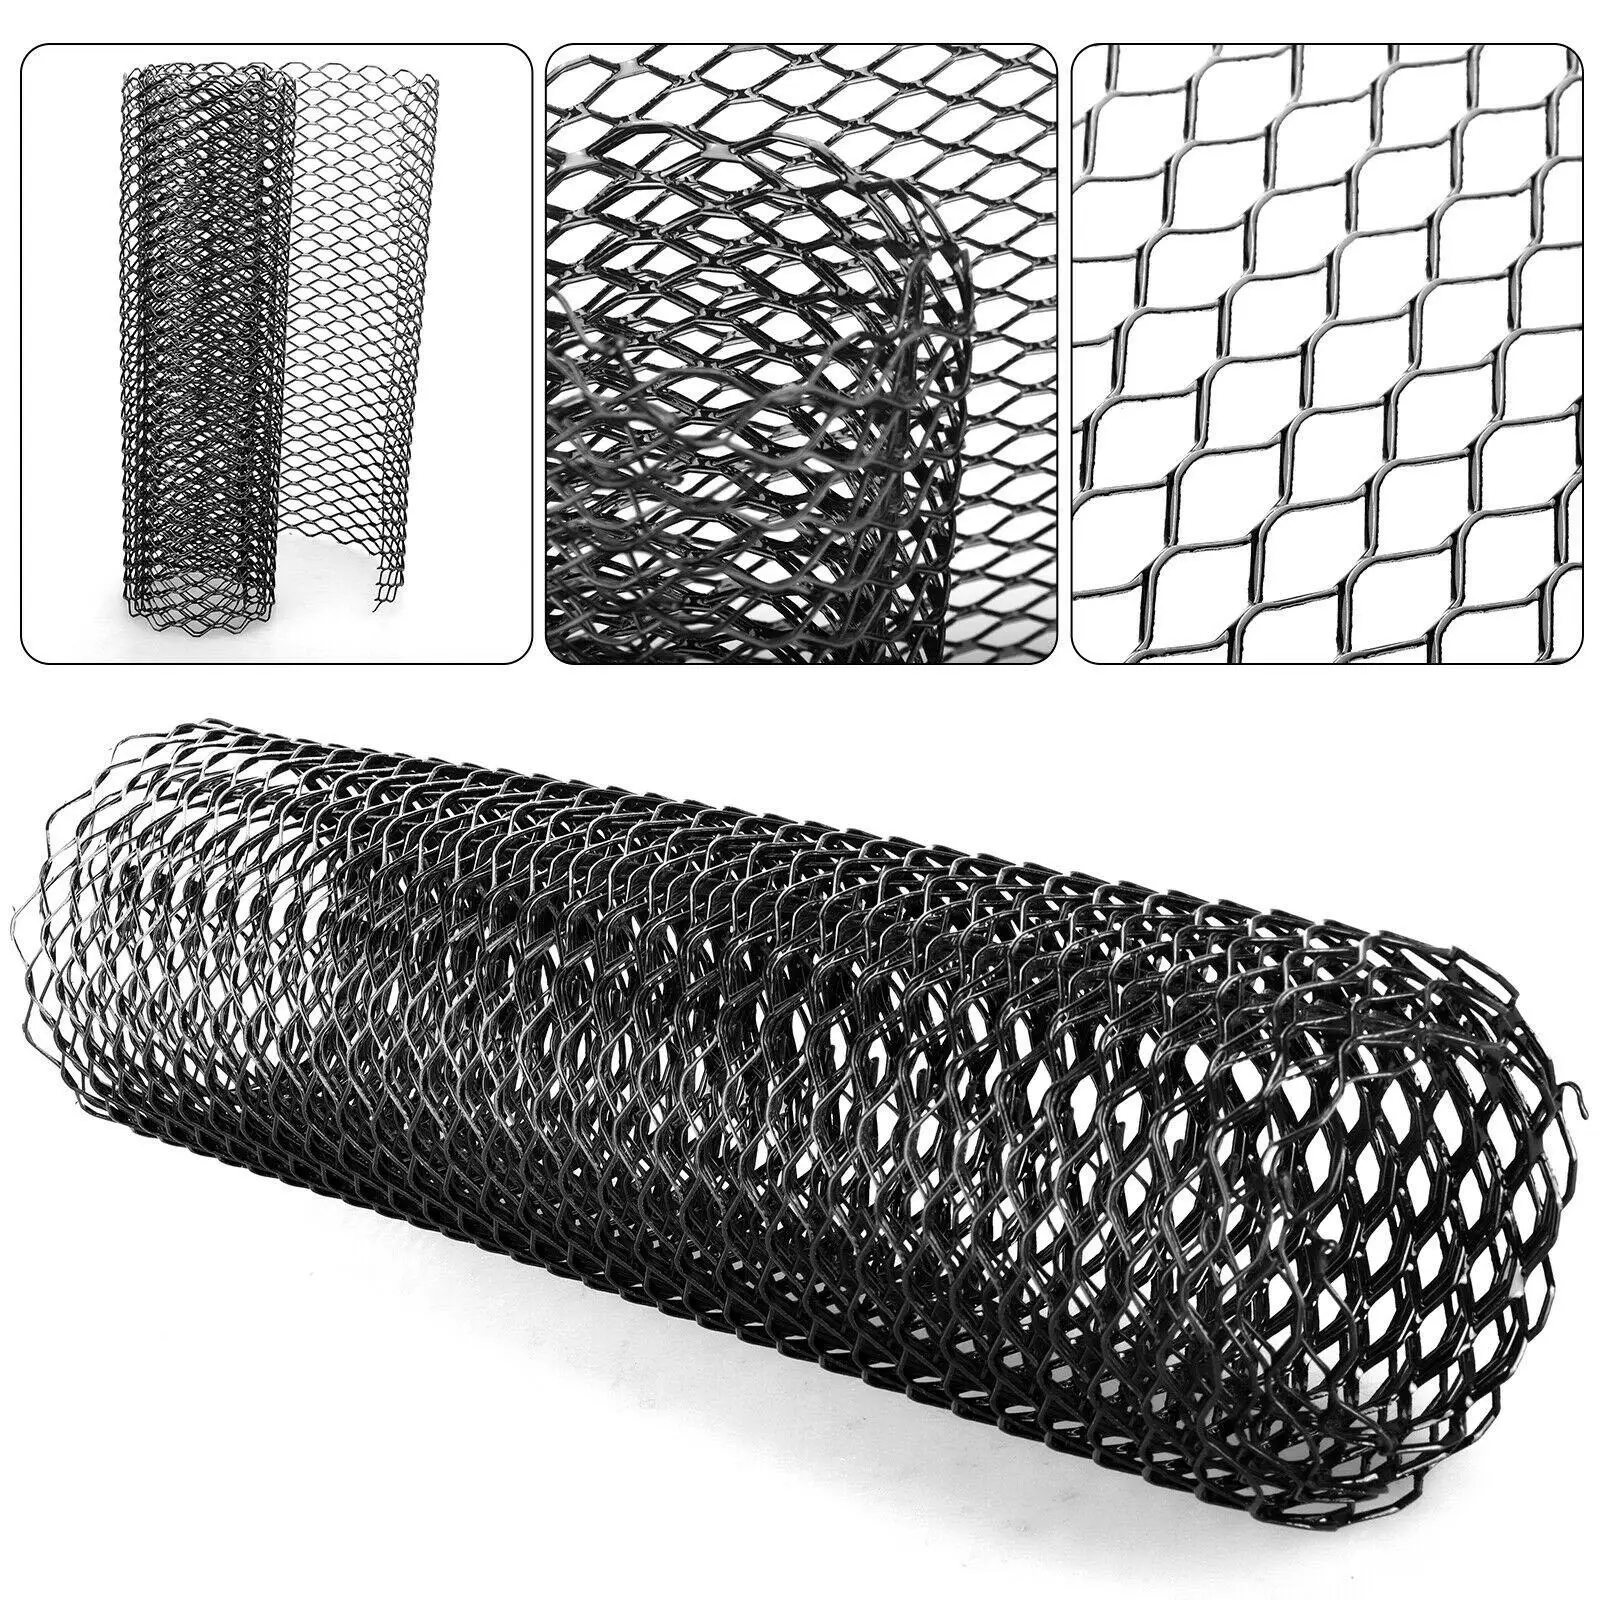 Grille Mesh Net Sheet 40x13inch Replace Multifunctional GM Fit for Car